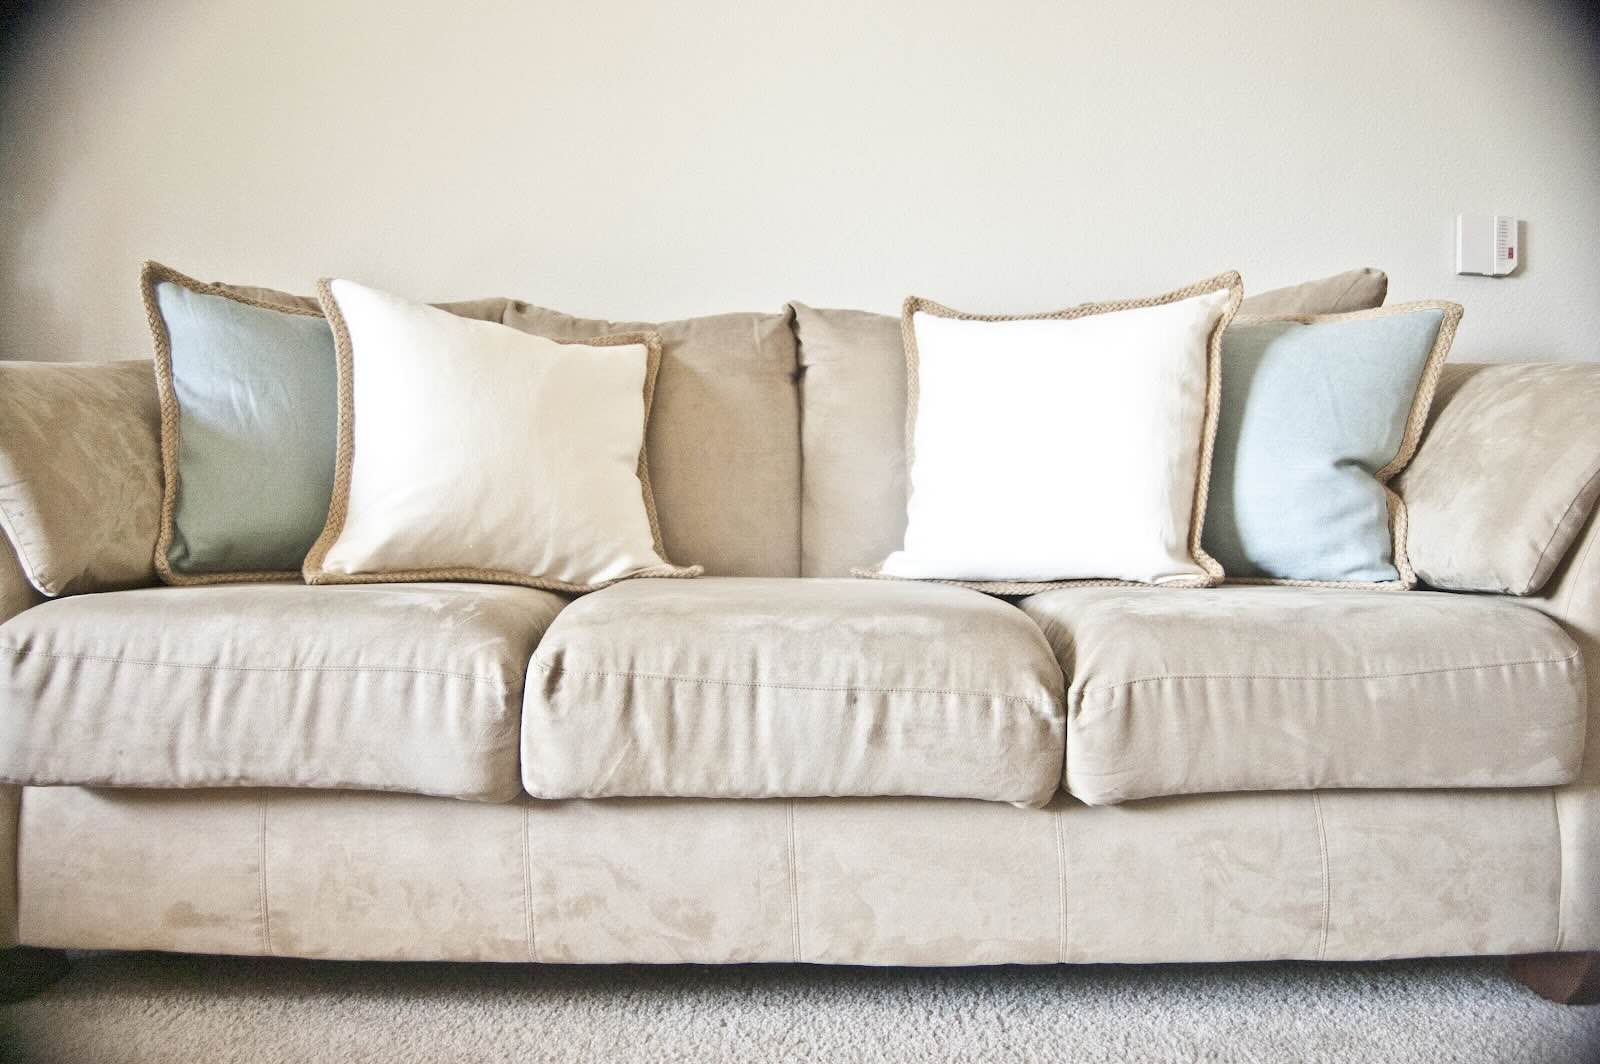 What Is The Best Foam For Couch Cushions